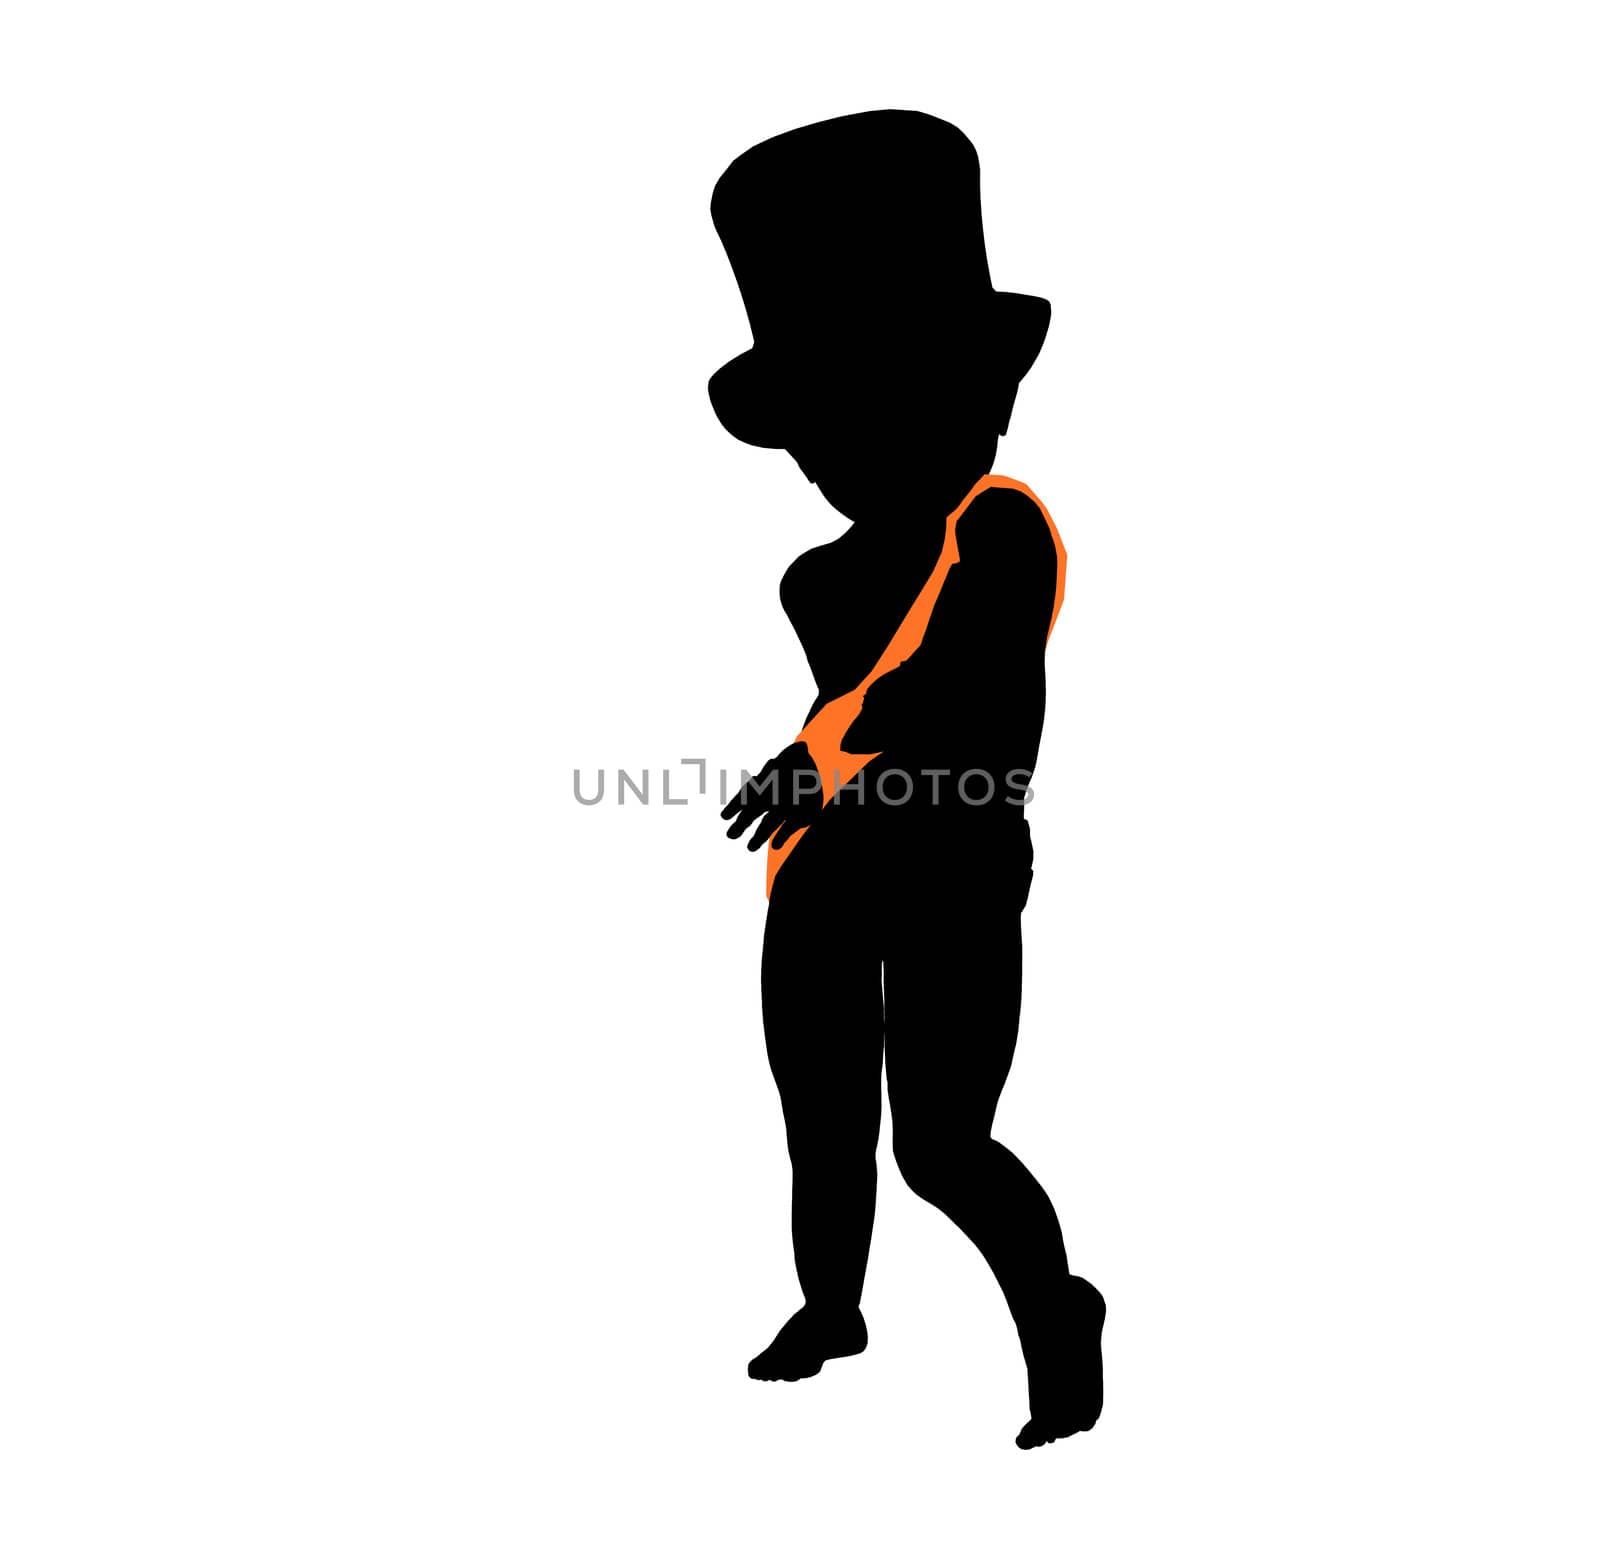 New Years Illustration Silhouette by kathygold